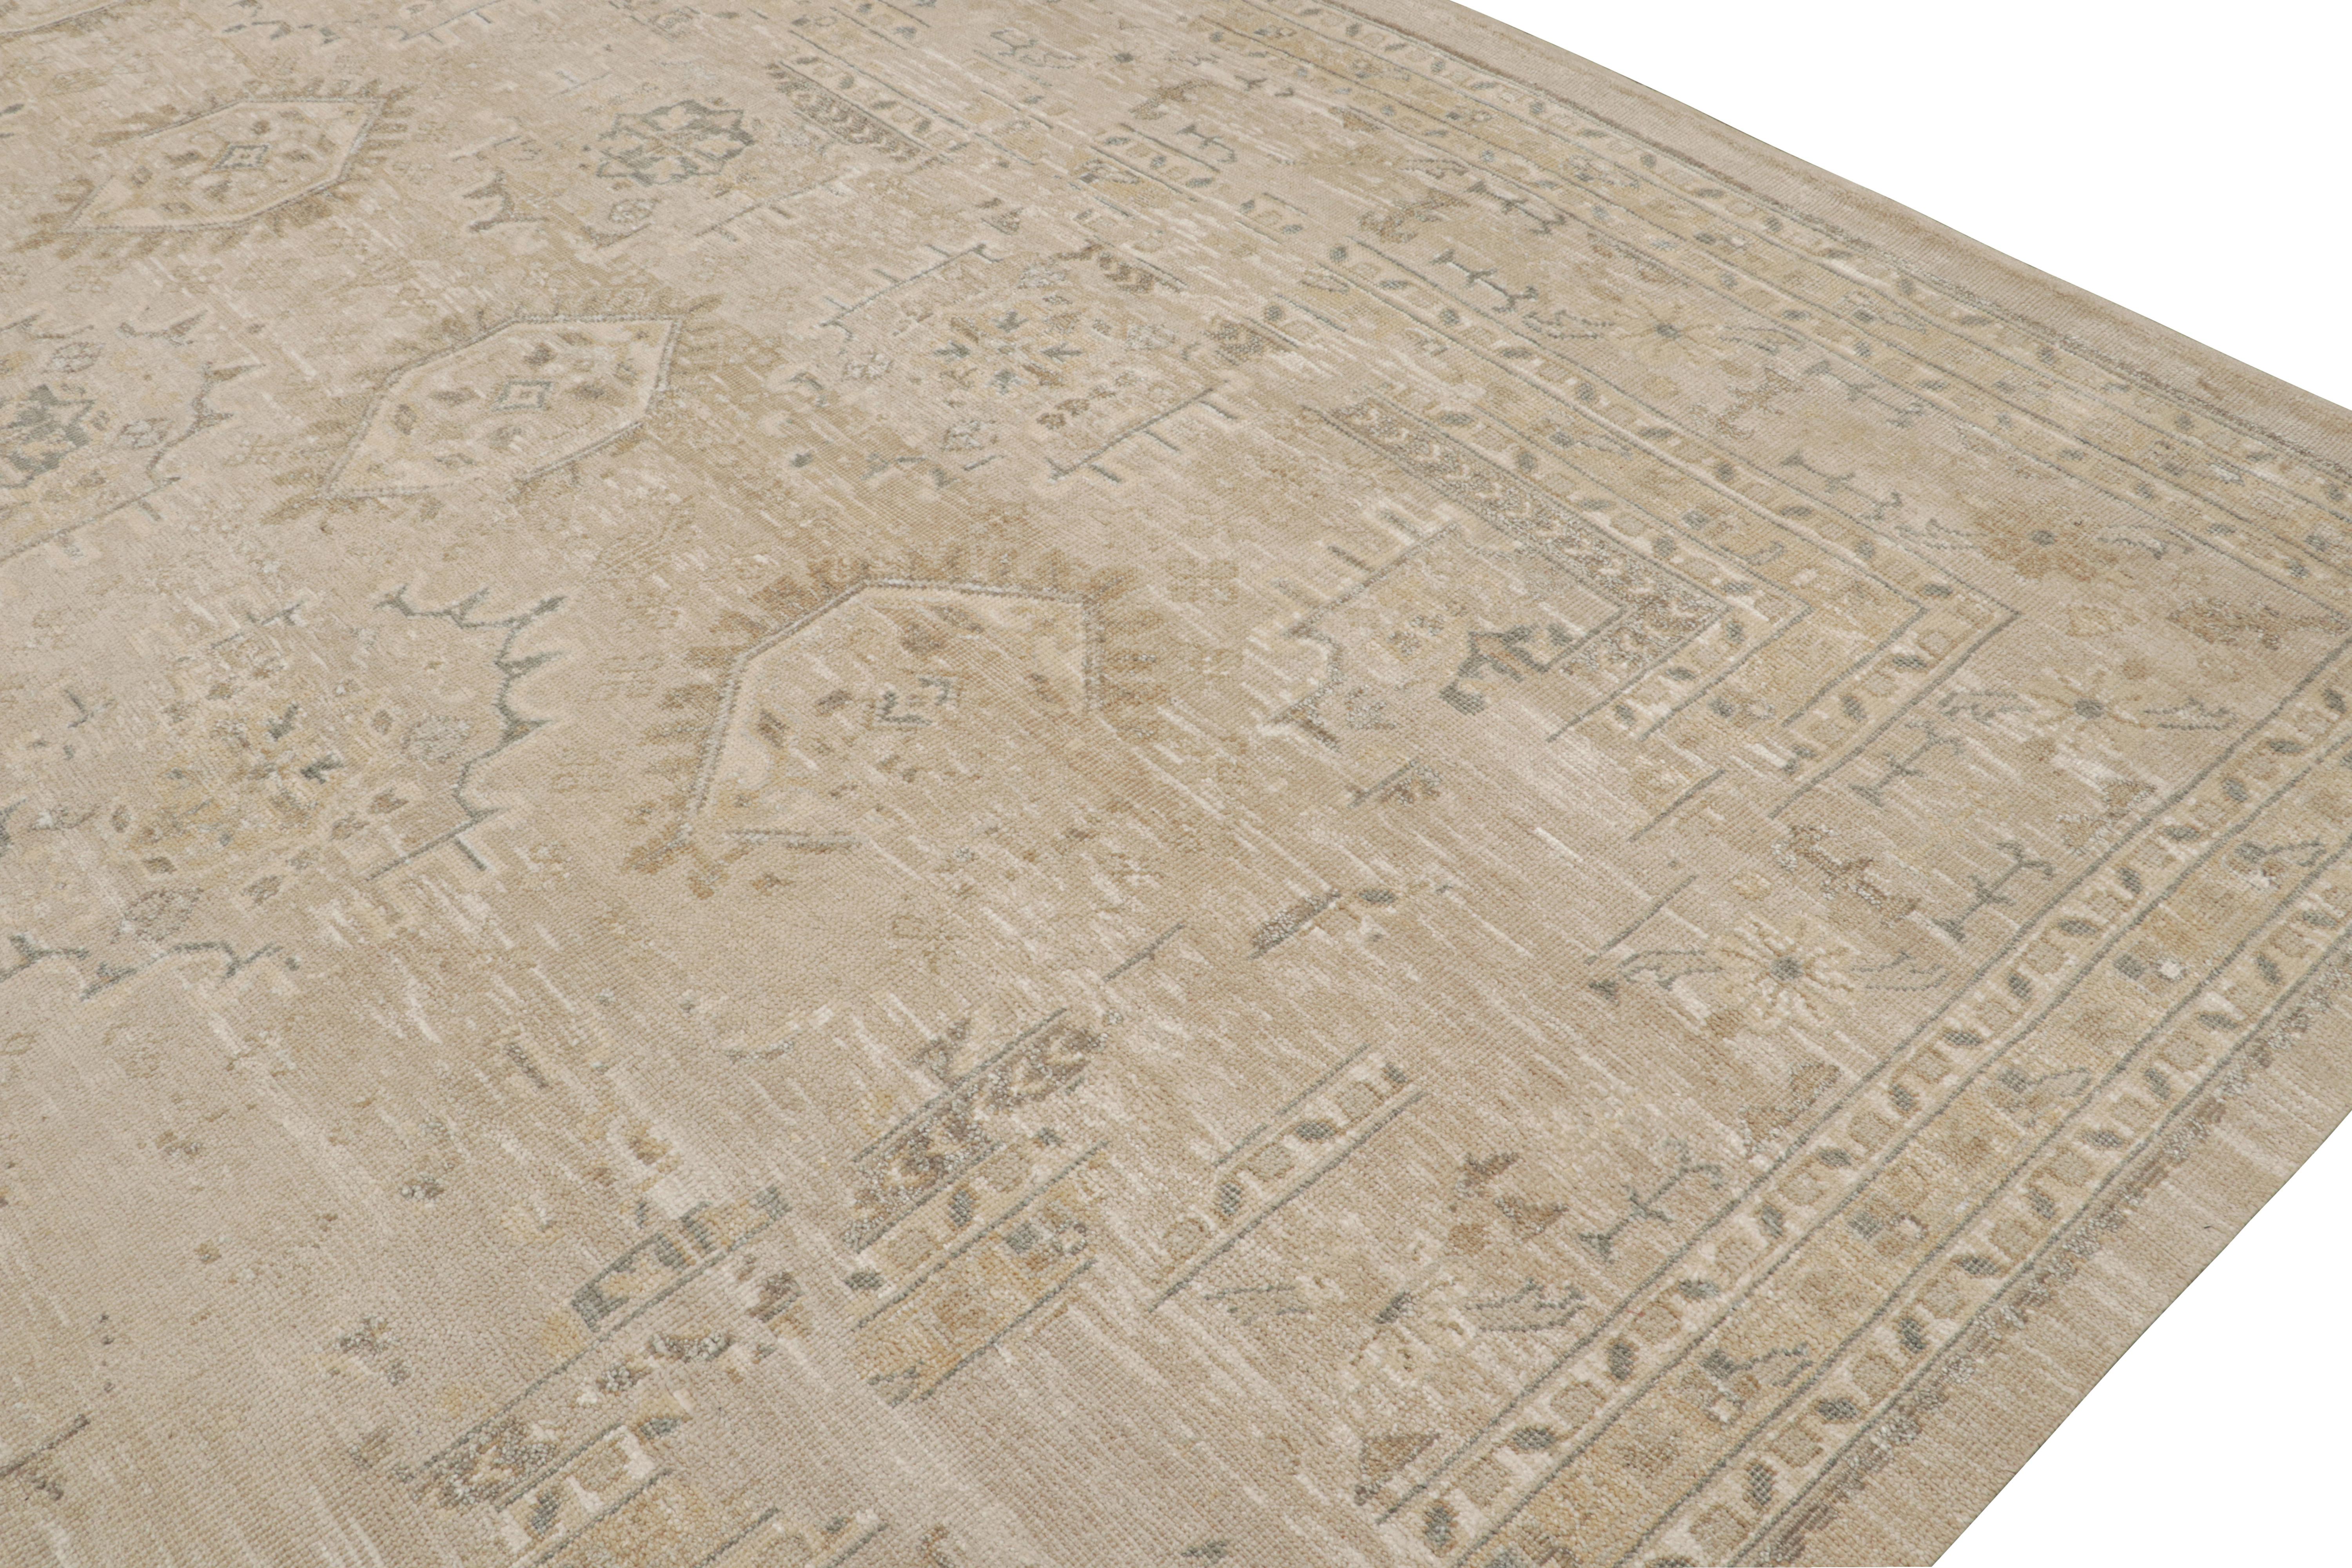 Rug & Kilim’s Oushak Style Oversized Rug in Taupe with Floral Patterns In New Condition For Sale In Long Island City, NY